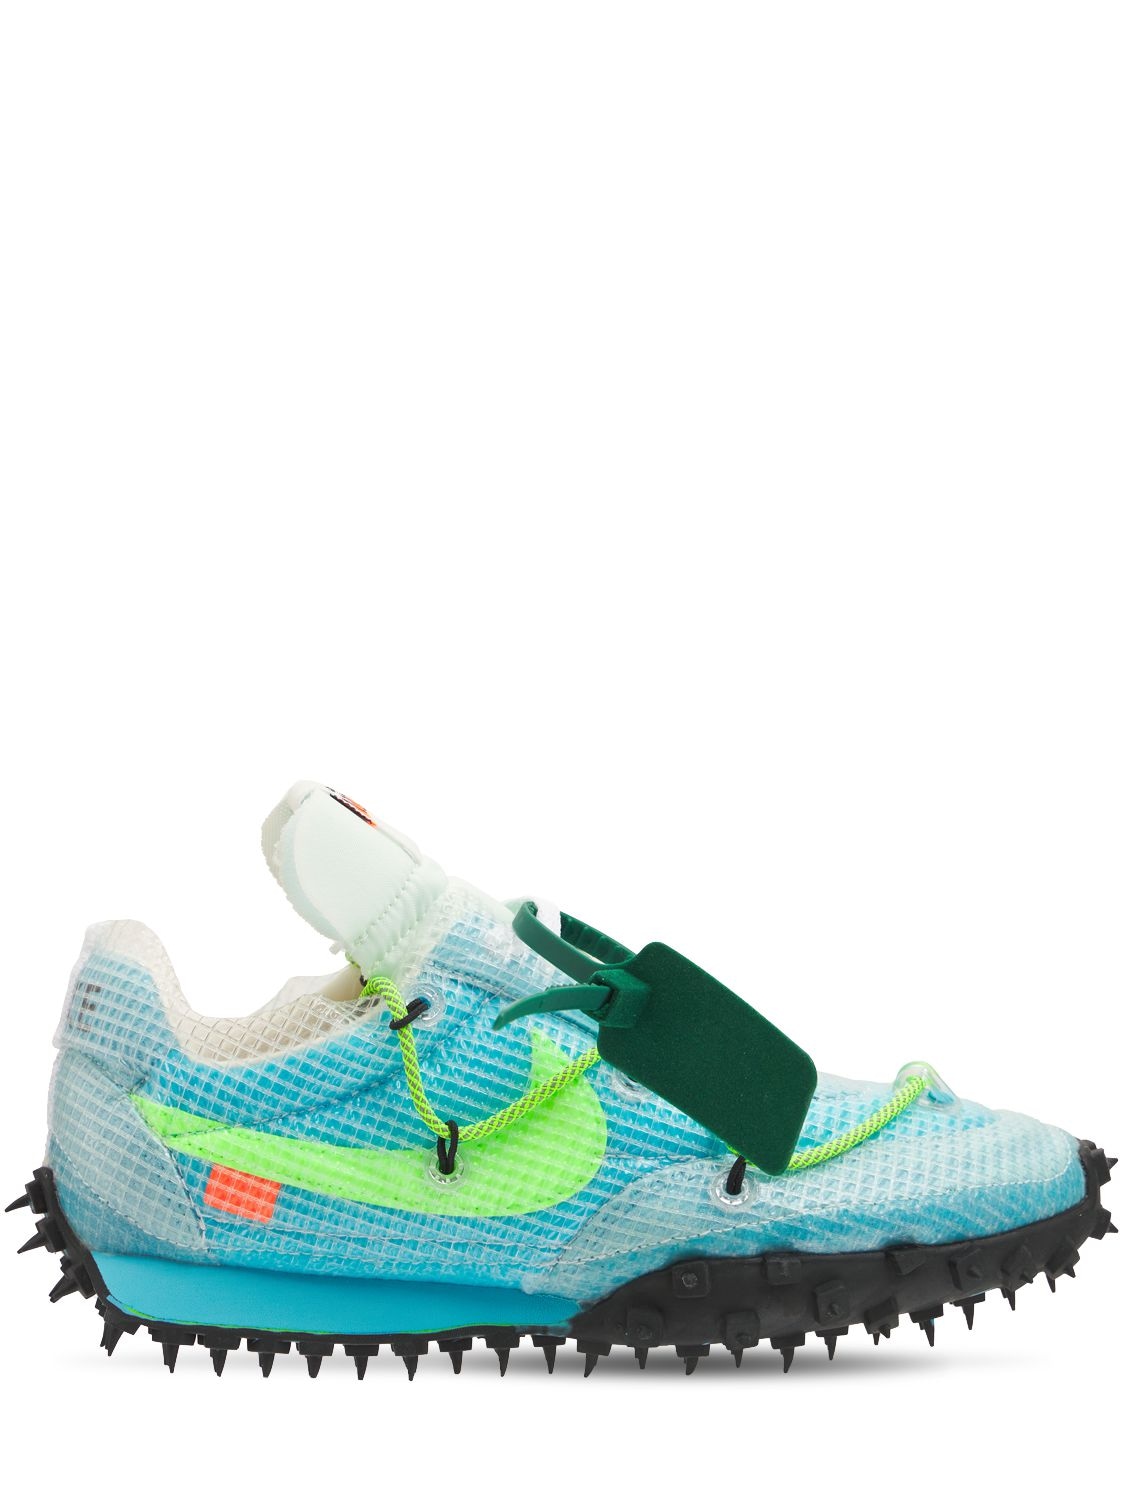 Nike Off-white W Waffle Racer Sneakers In Vivid Sky